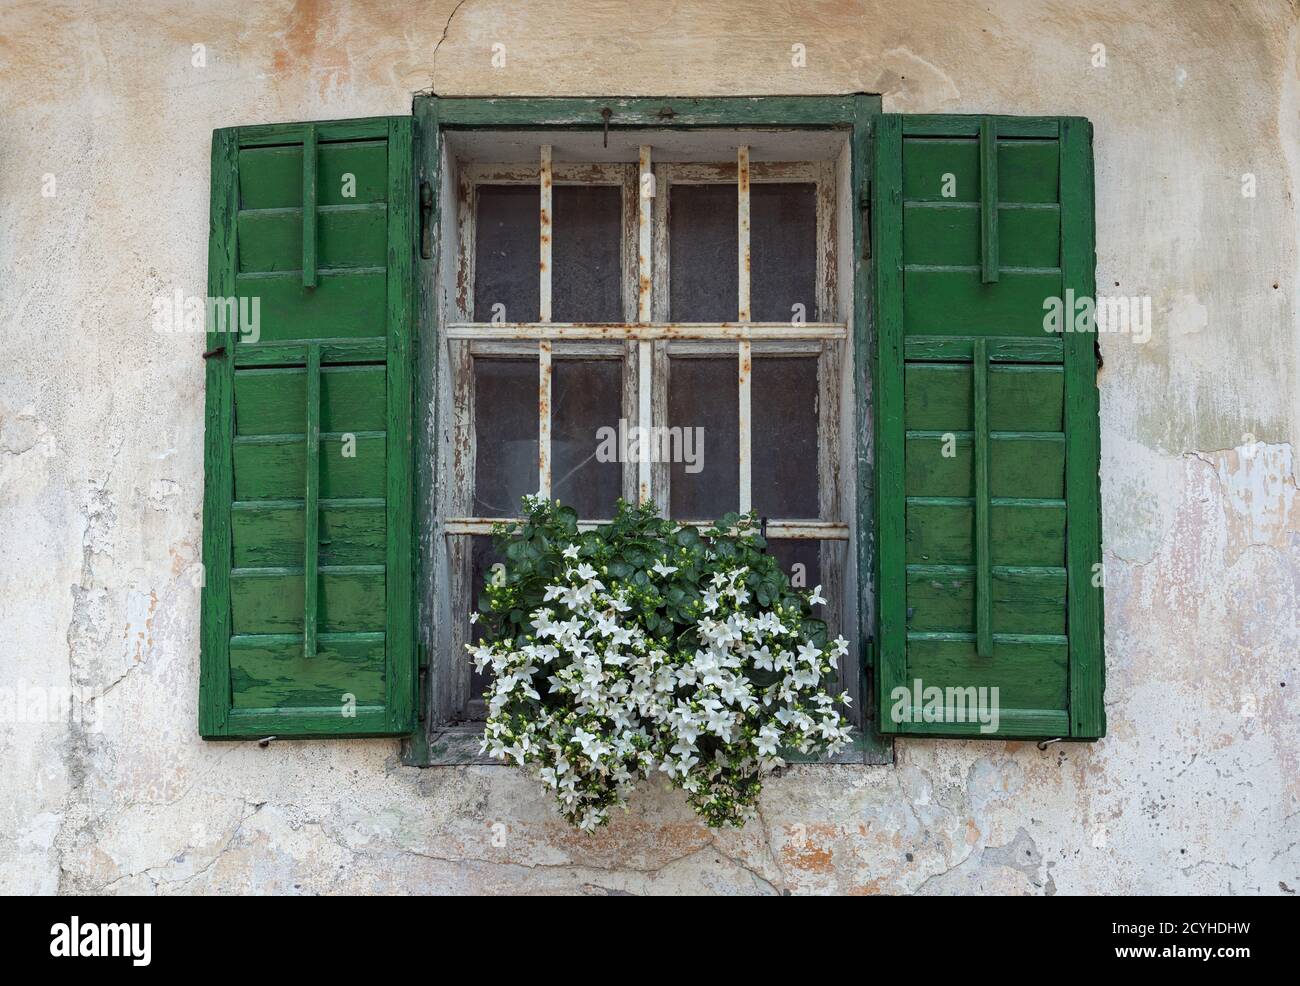 Window with wooden green shutters and white flowers Stock Photo